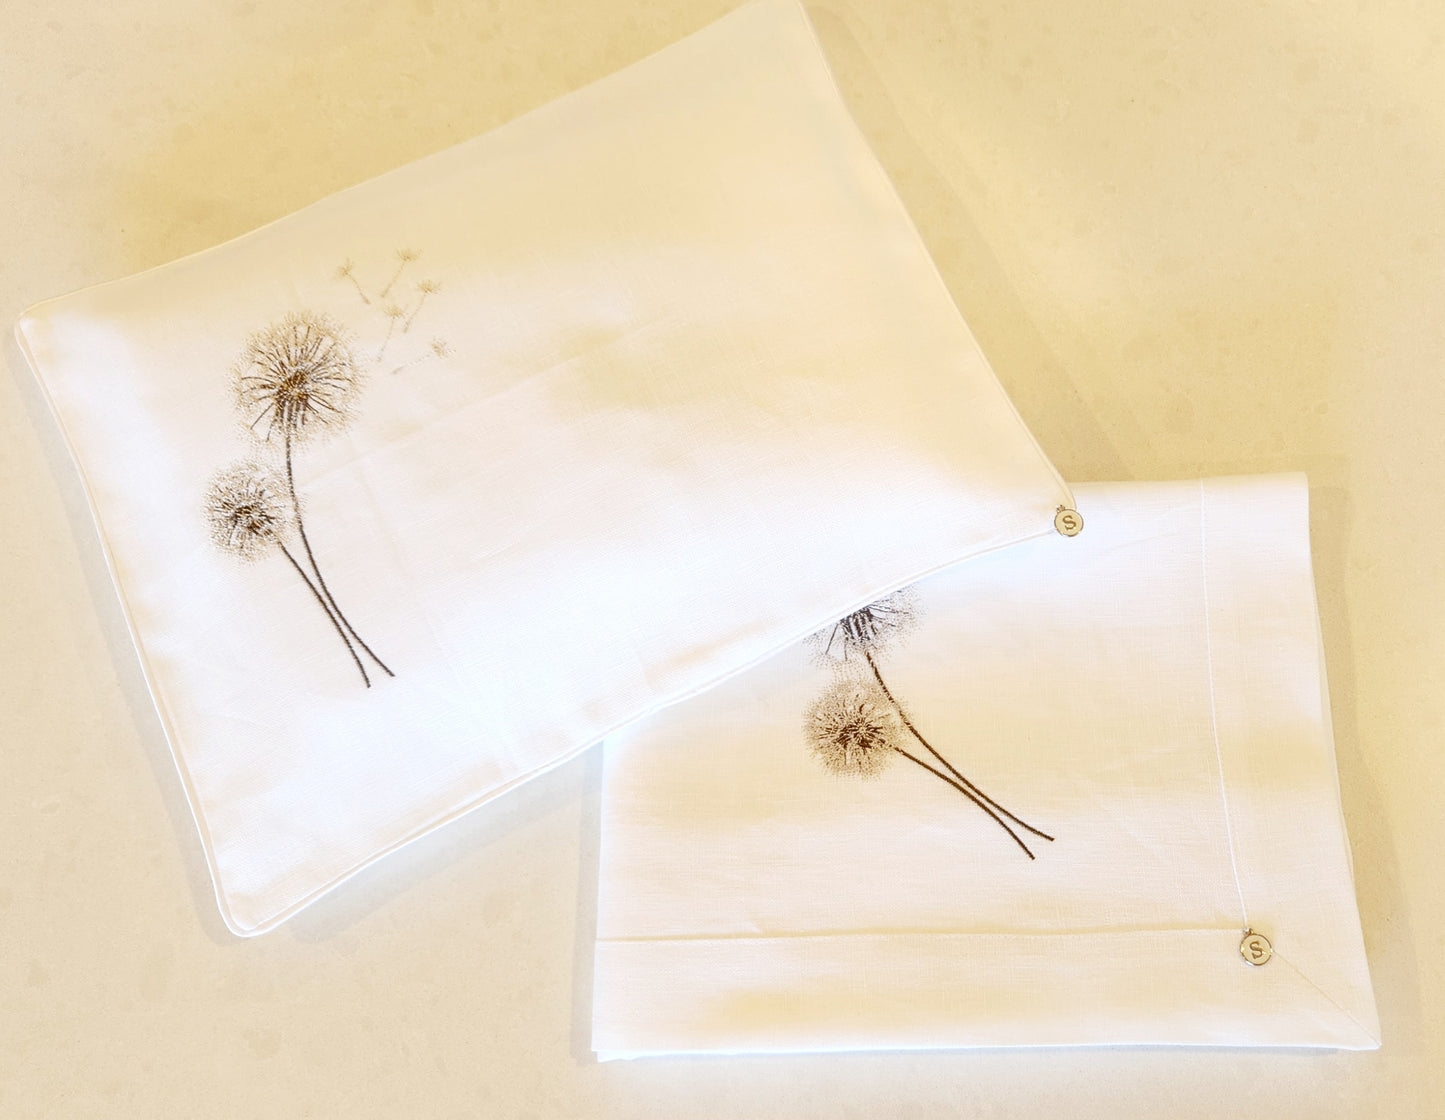 Exclusive Baby Wrap & Pillowcase Set, White Linen with embroidered dandelions